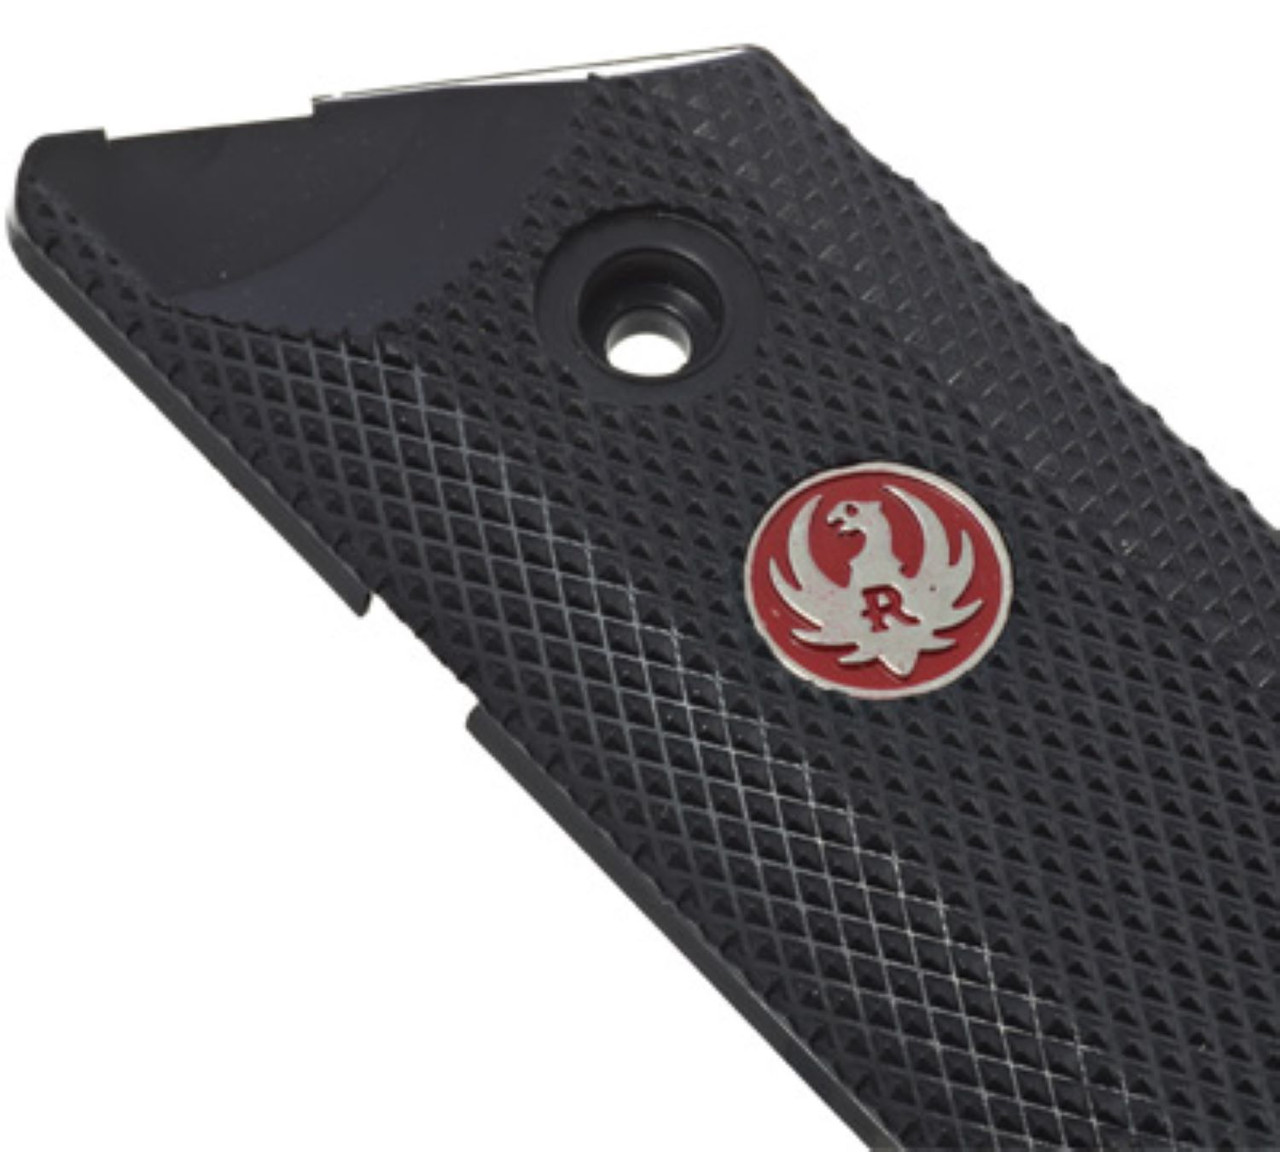 Ruger Mark IV Checkered Black Plastic Grips With Red Medallion - 90608R